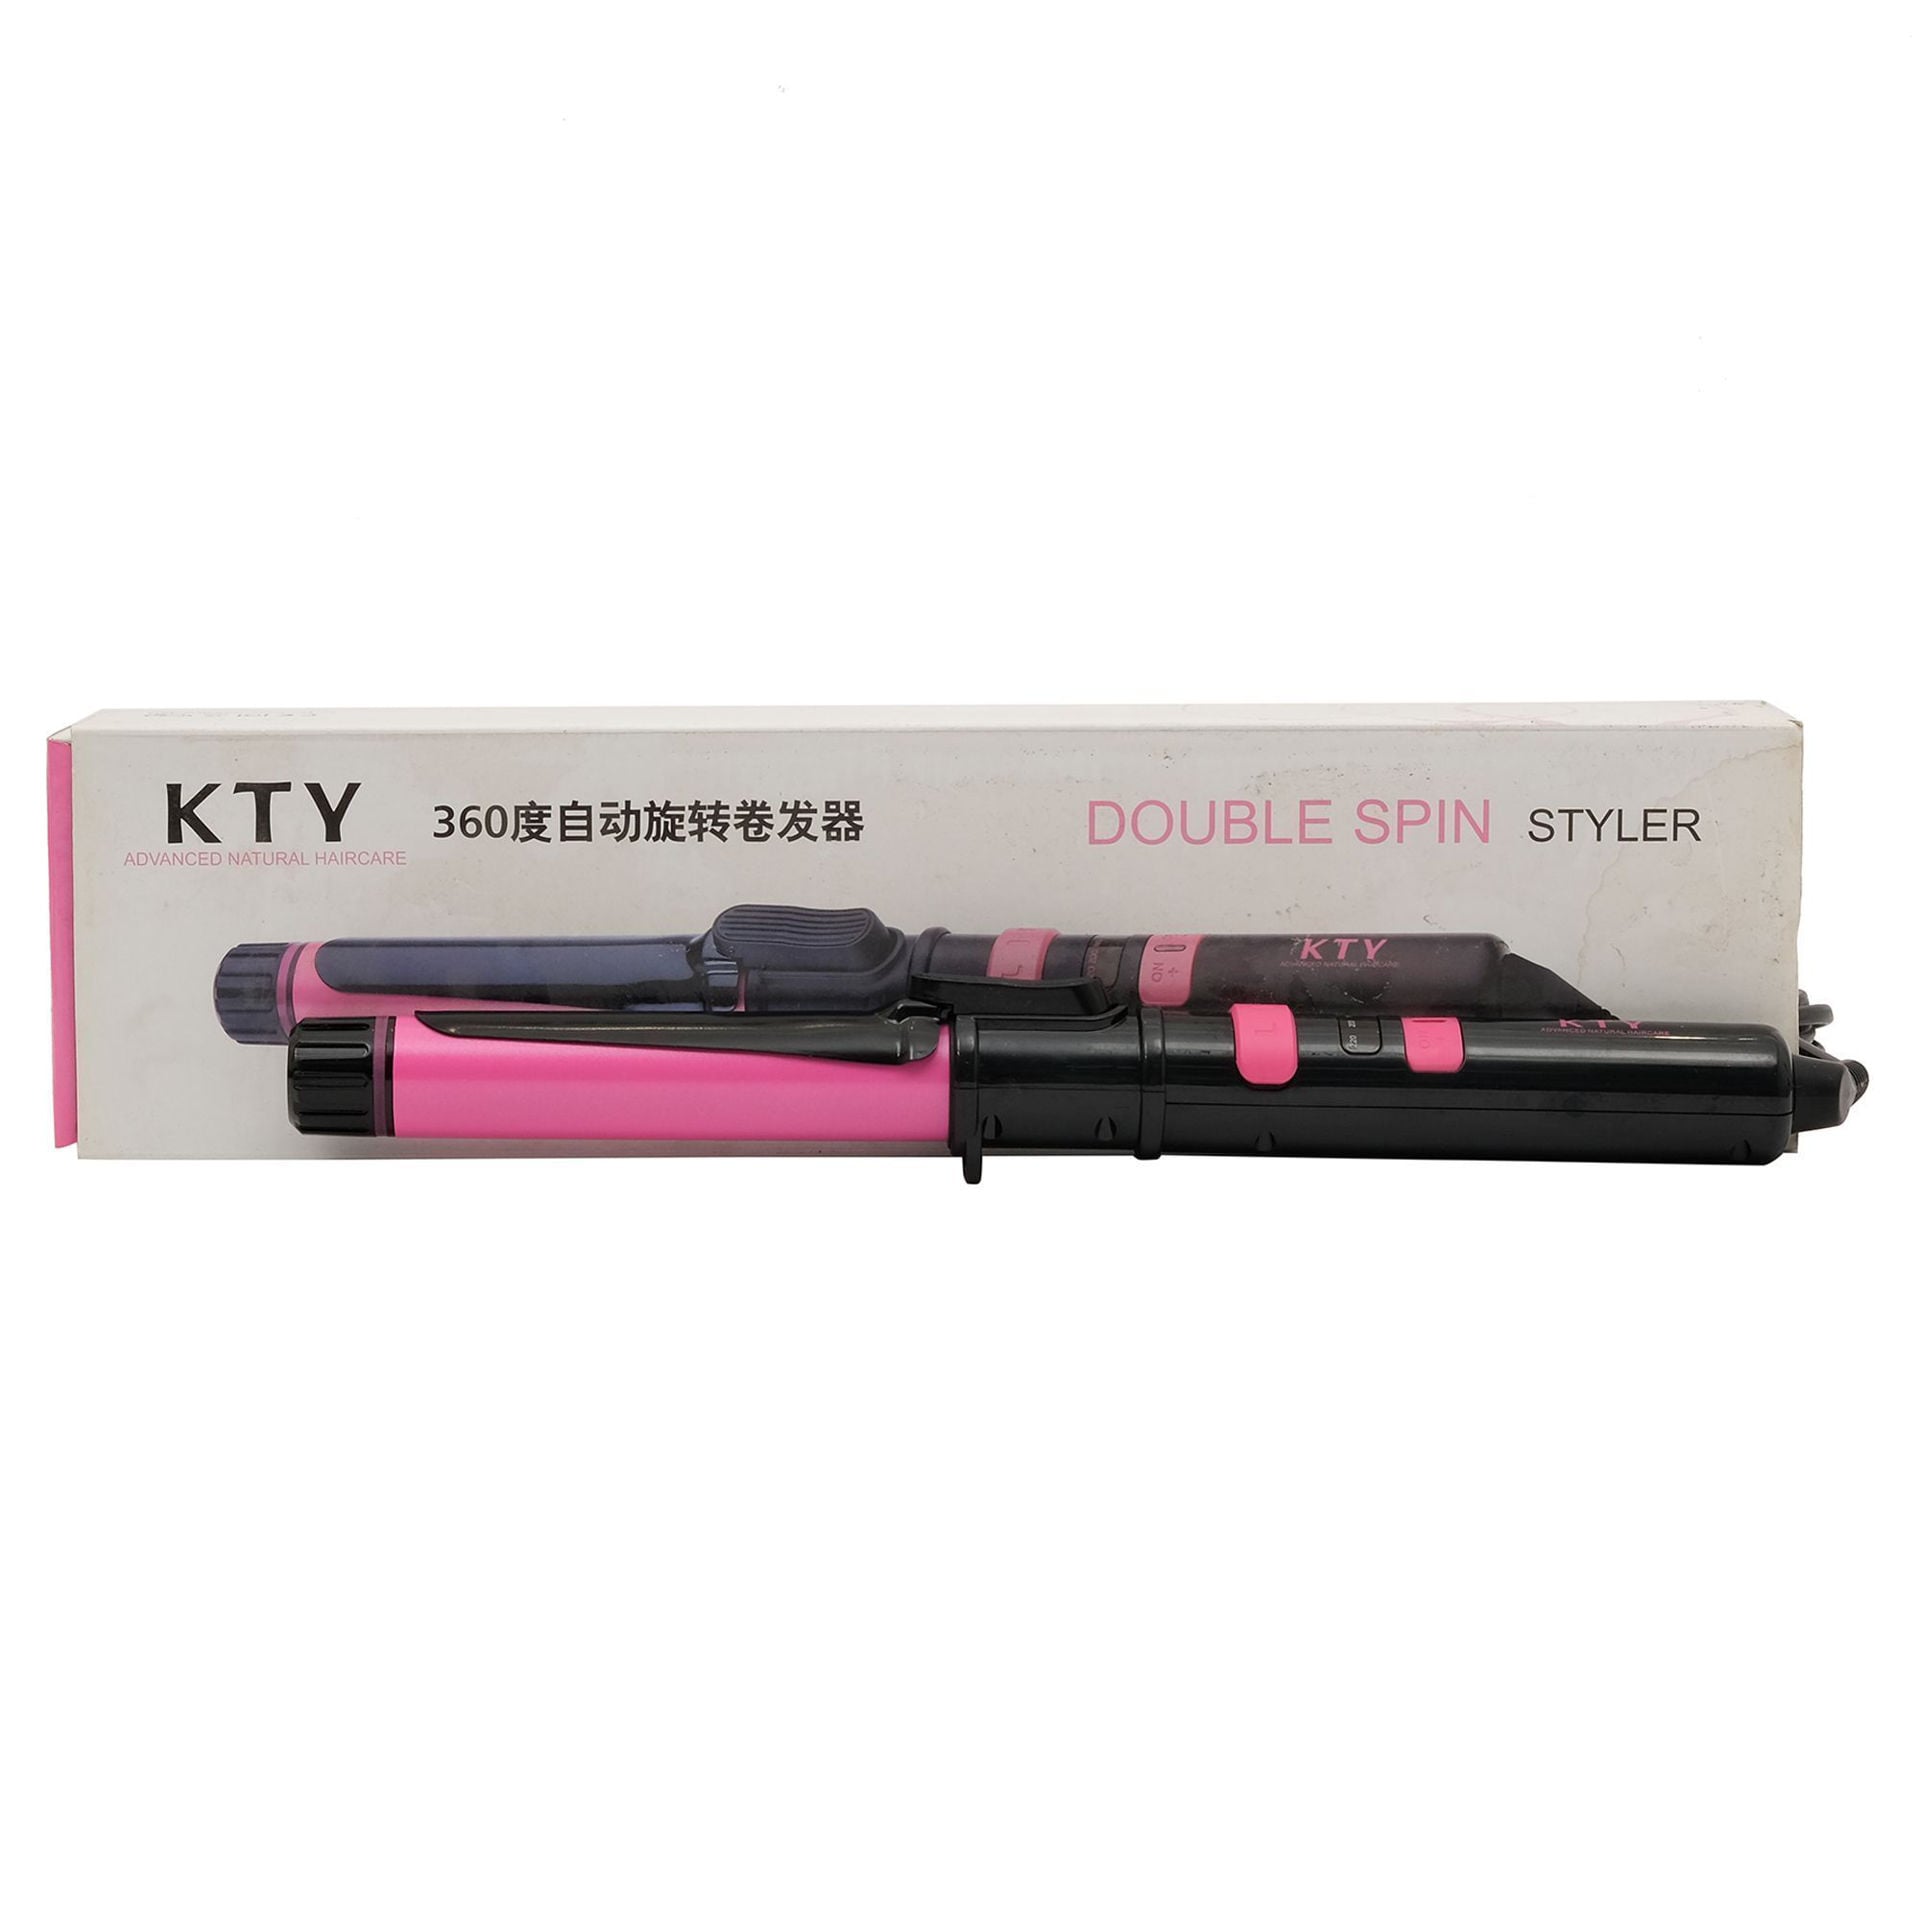 Shop Kty KTY Hair Double Spin Styler Pink | Dragon Mart UAE